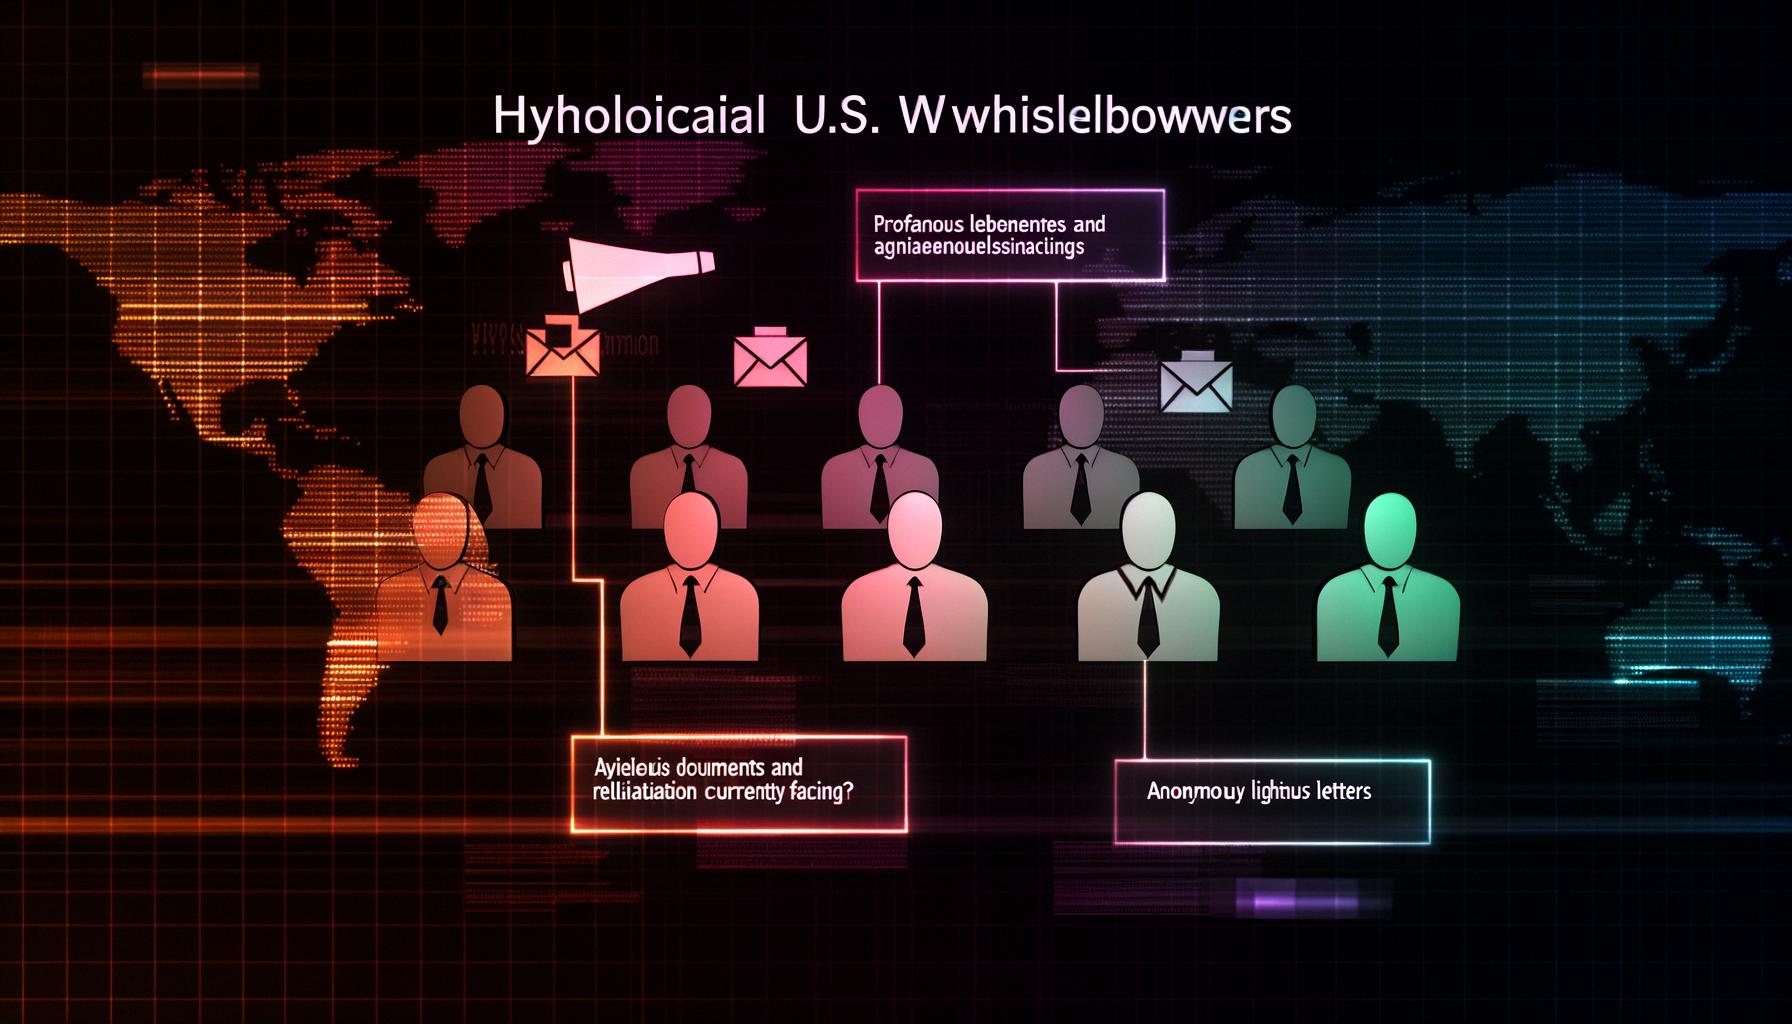 U.S. whistleblowers are severely targeted, impacting organizational transparency and accountability.